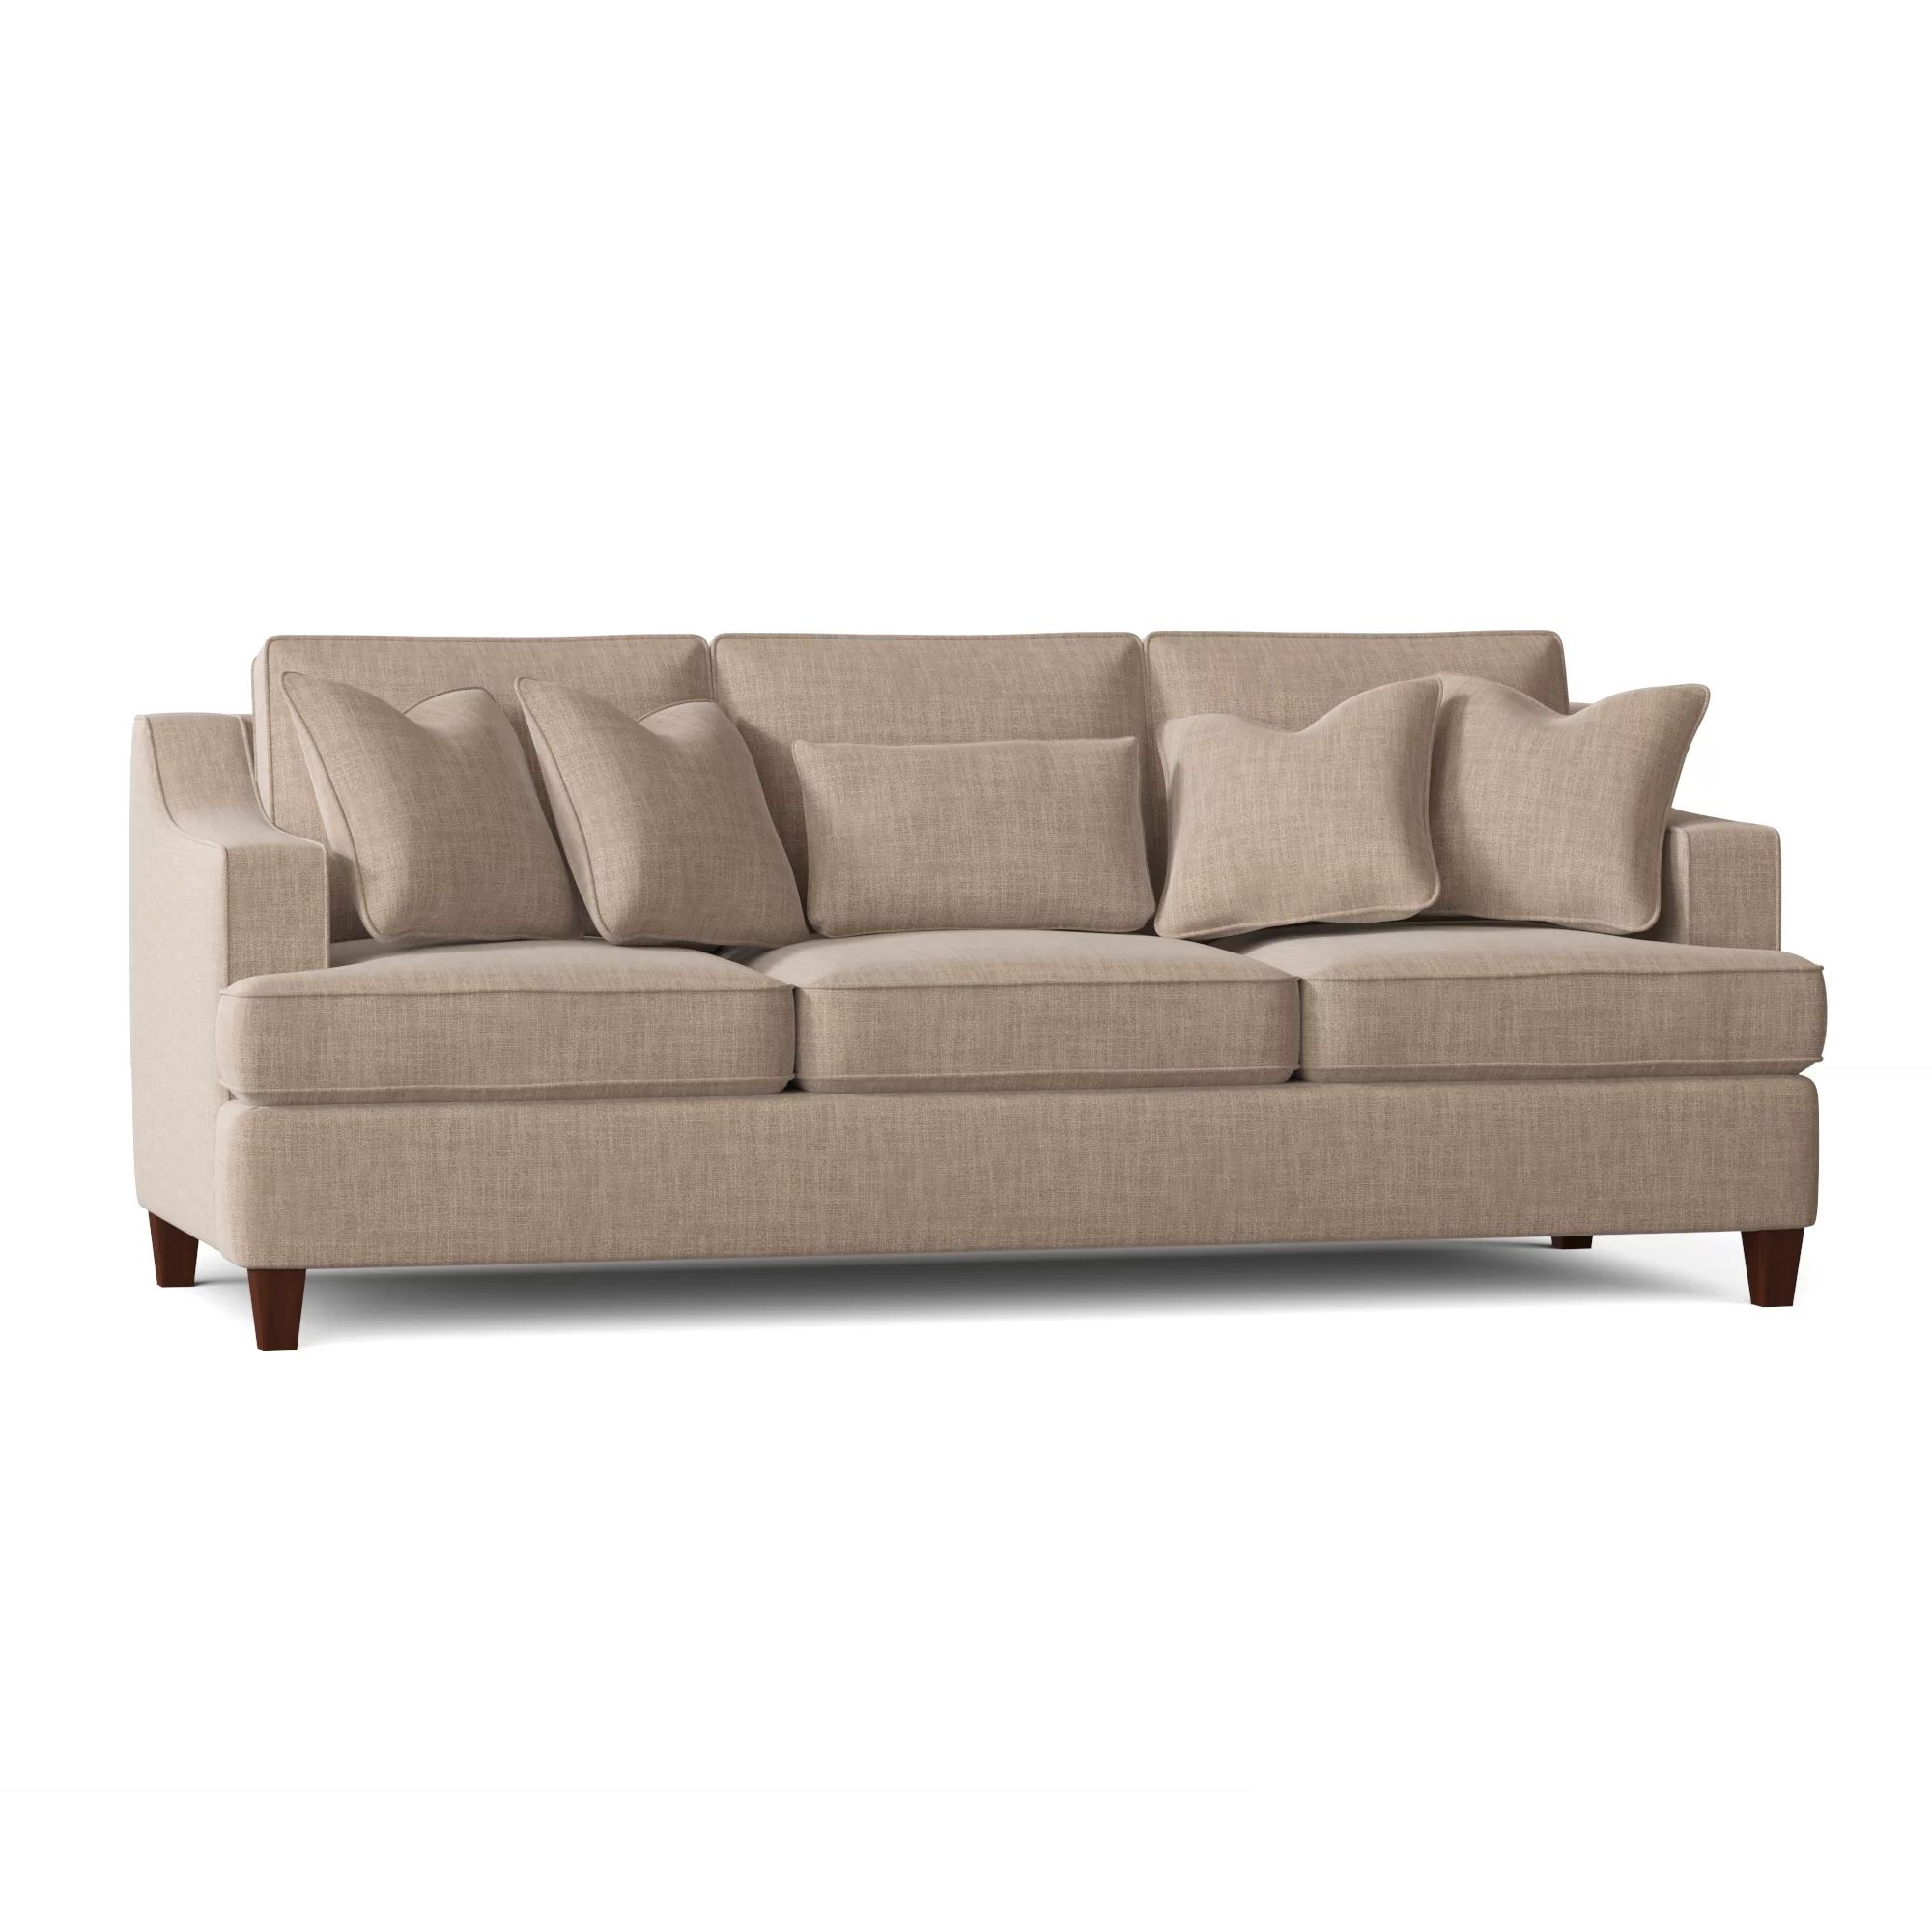 Sonny 91'' Sofa with Reversible Cushions | Wayfair Professional